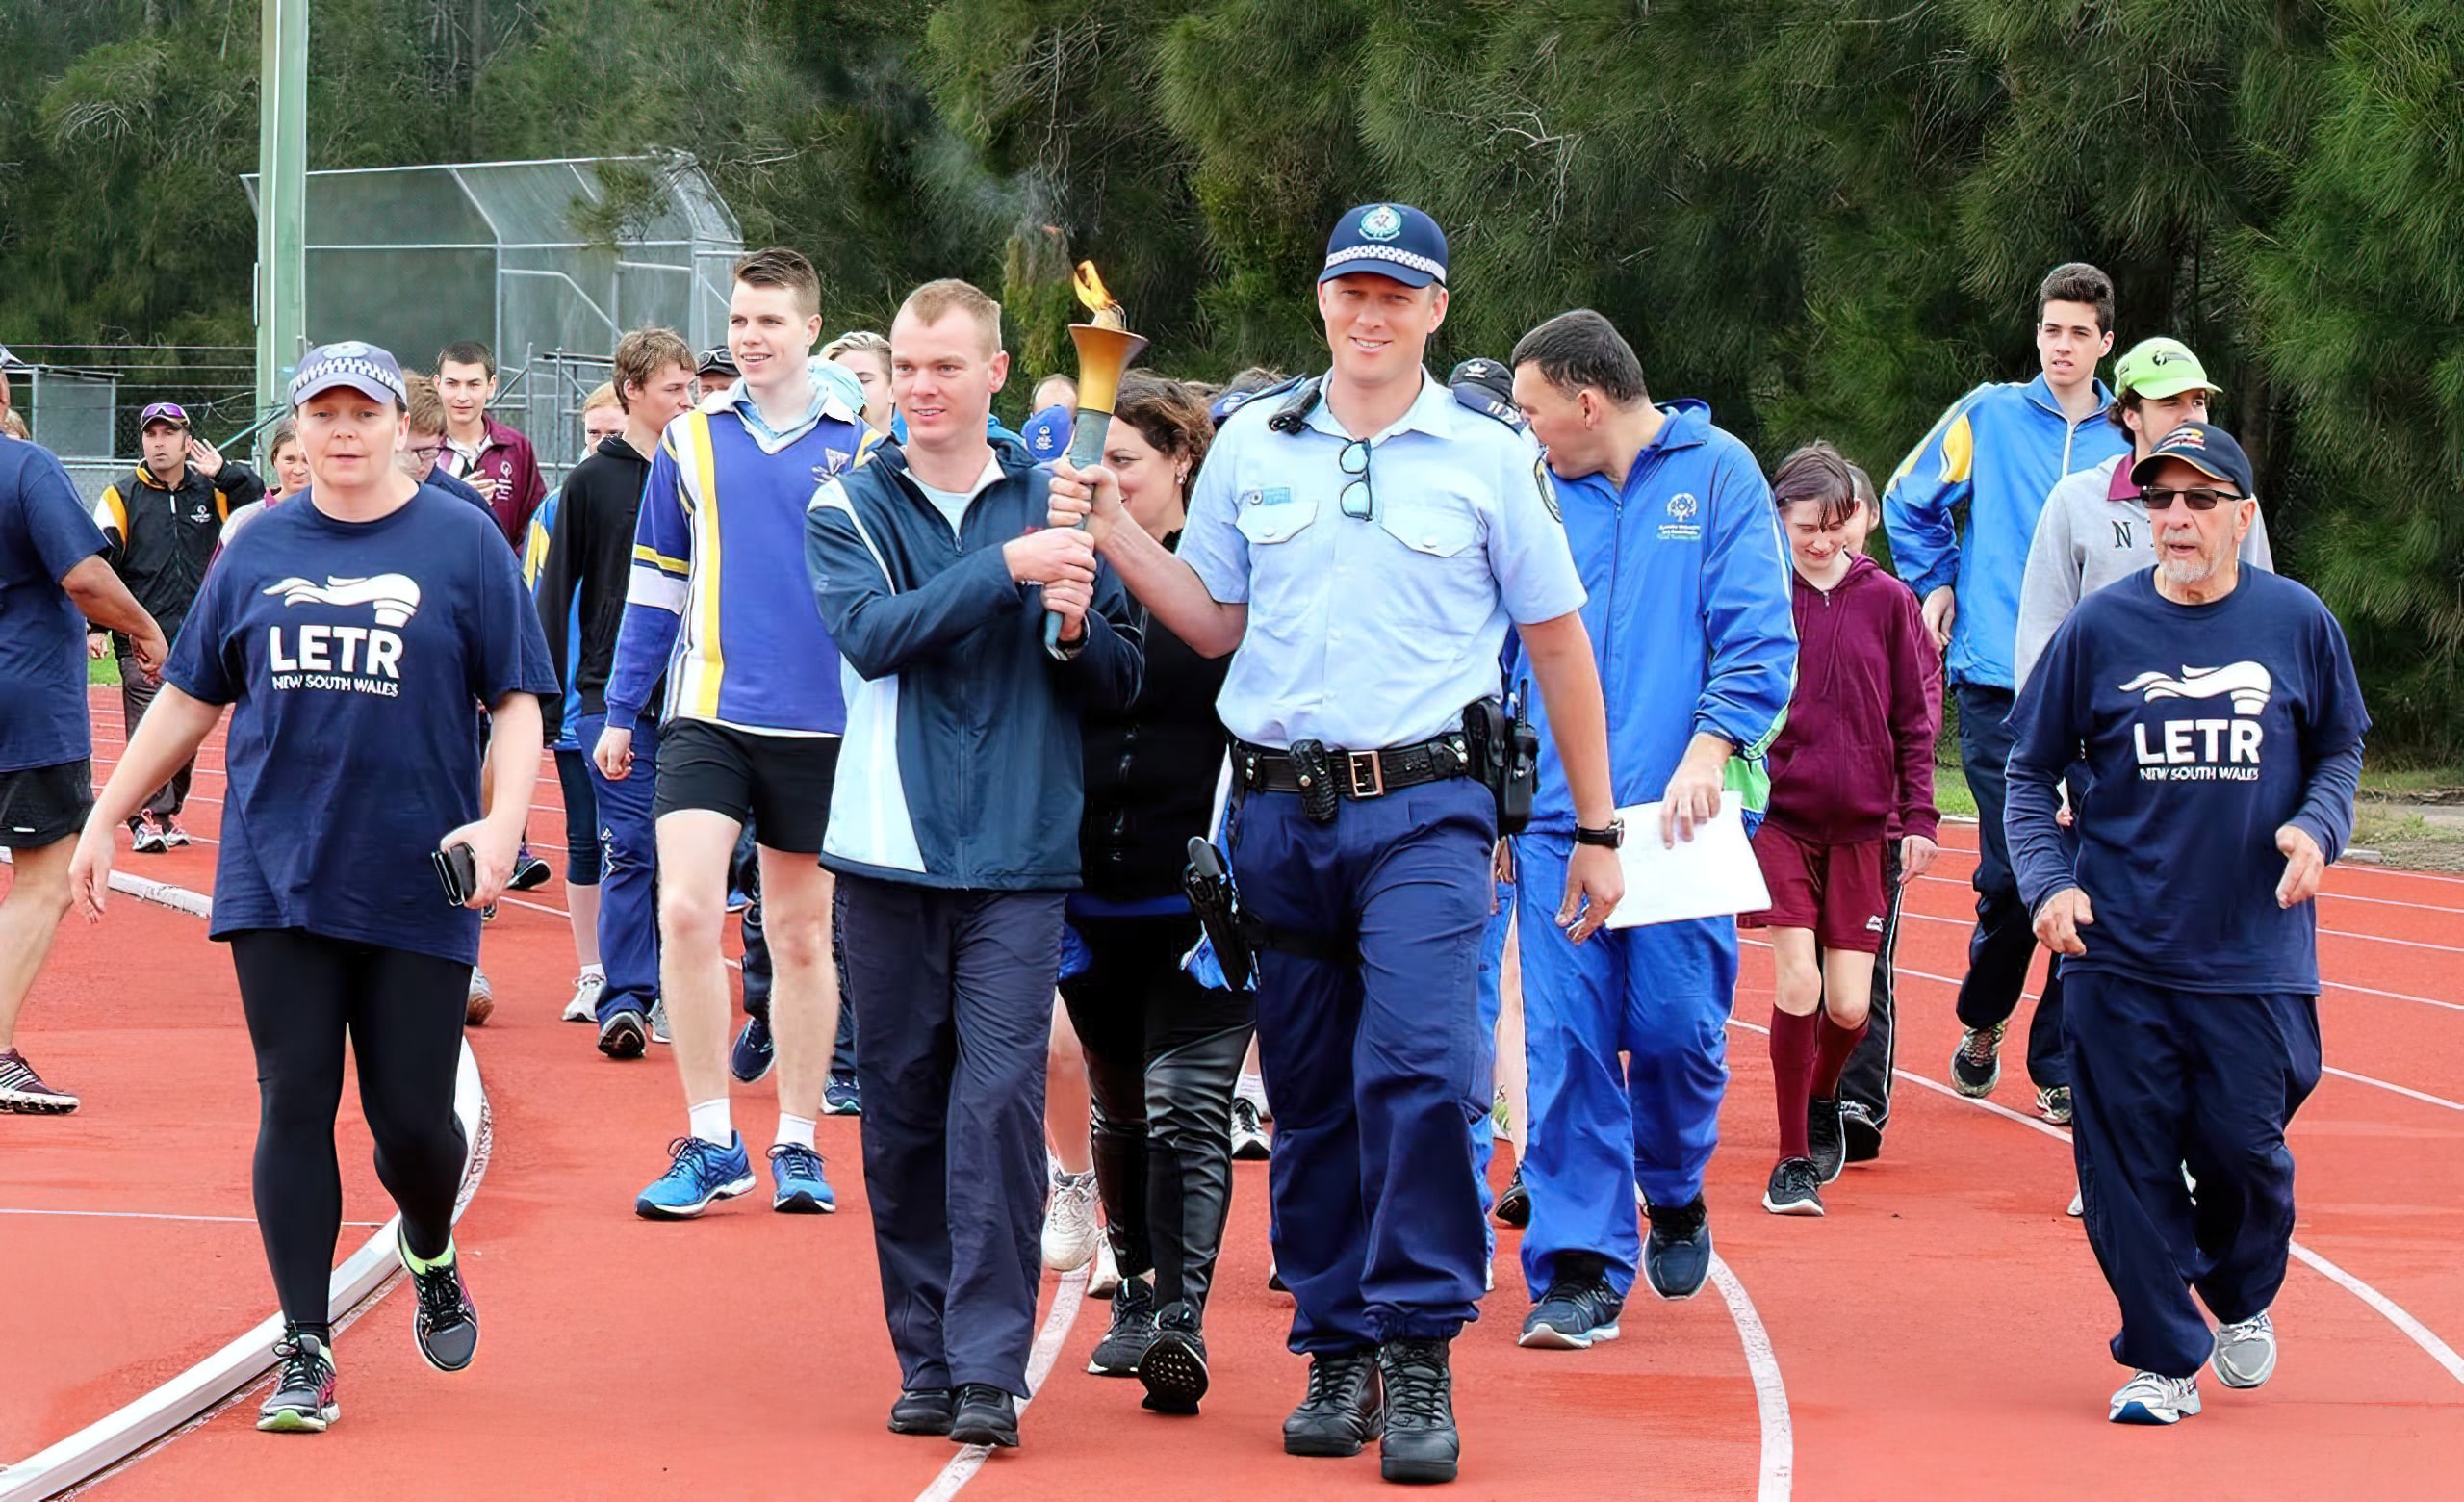 Awareness
To raise awareness within NSW Police, other government agencies and the communities we serve of the existence and nature of the Special Olympics movement.